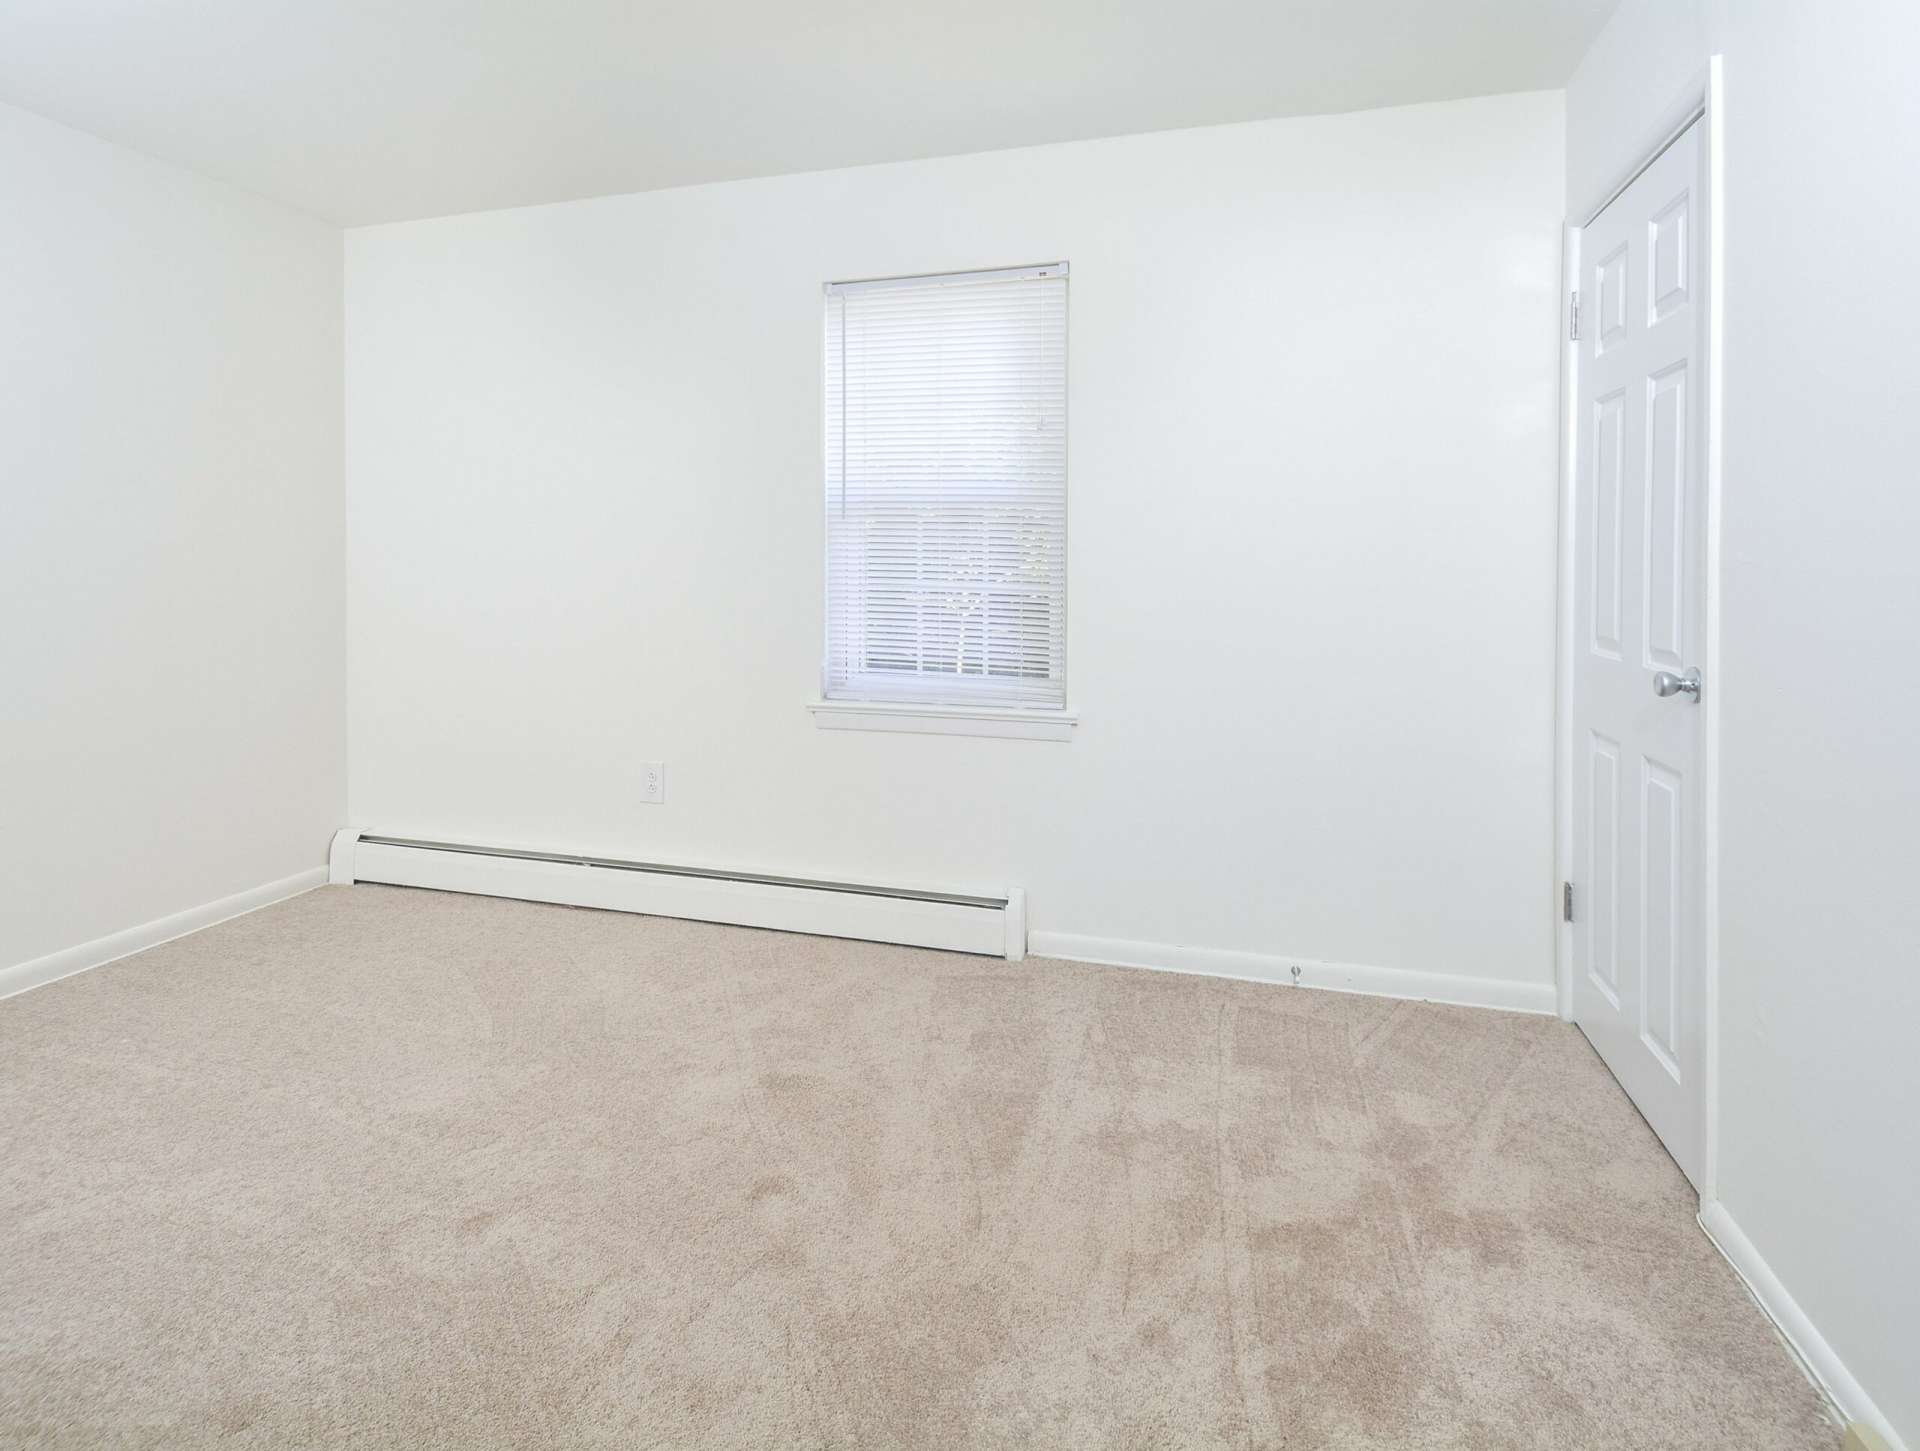 Bedroom with beige carpets, white walls, and a window.